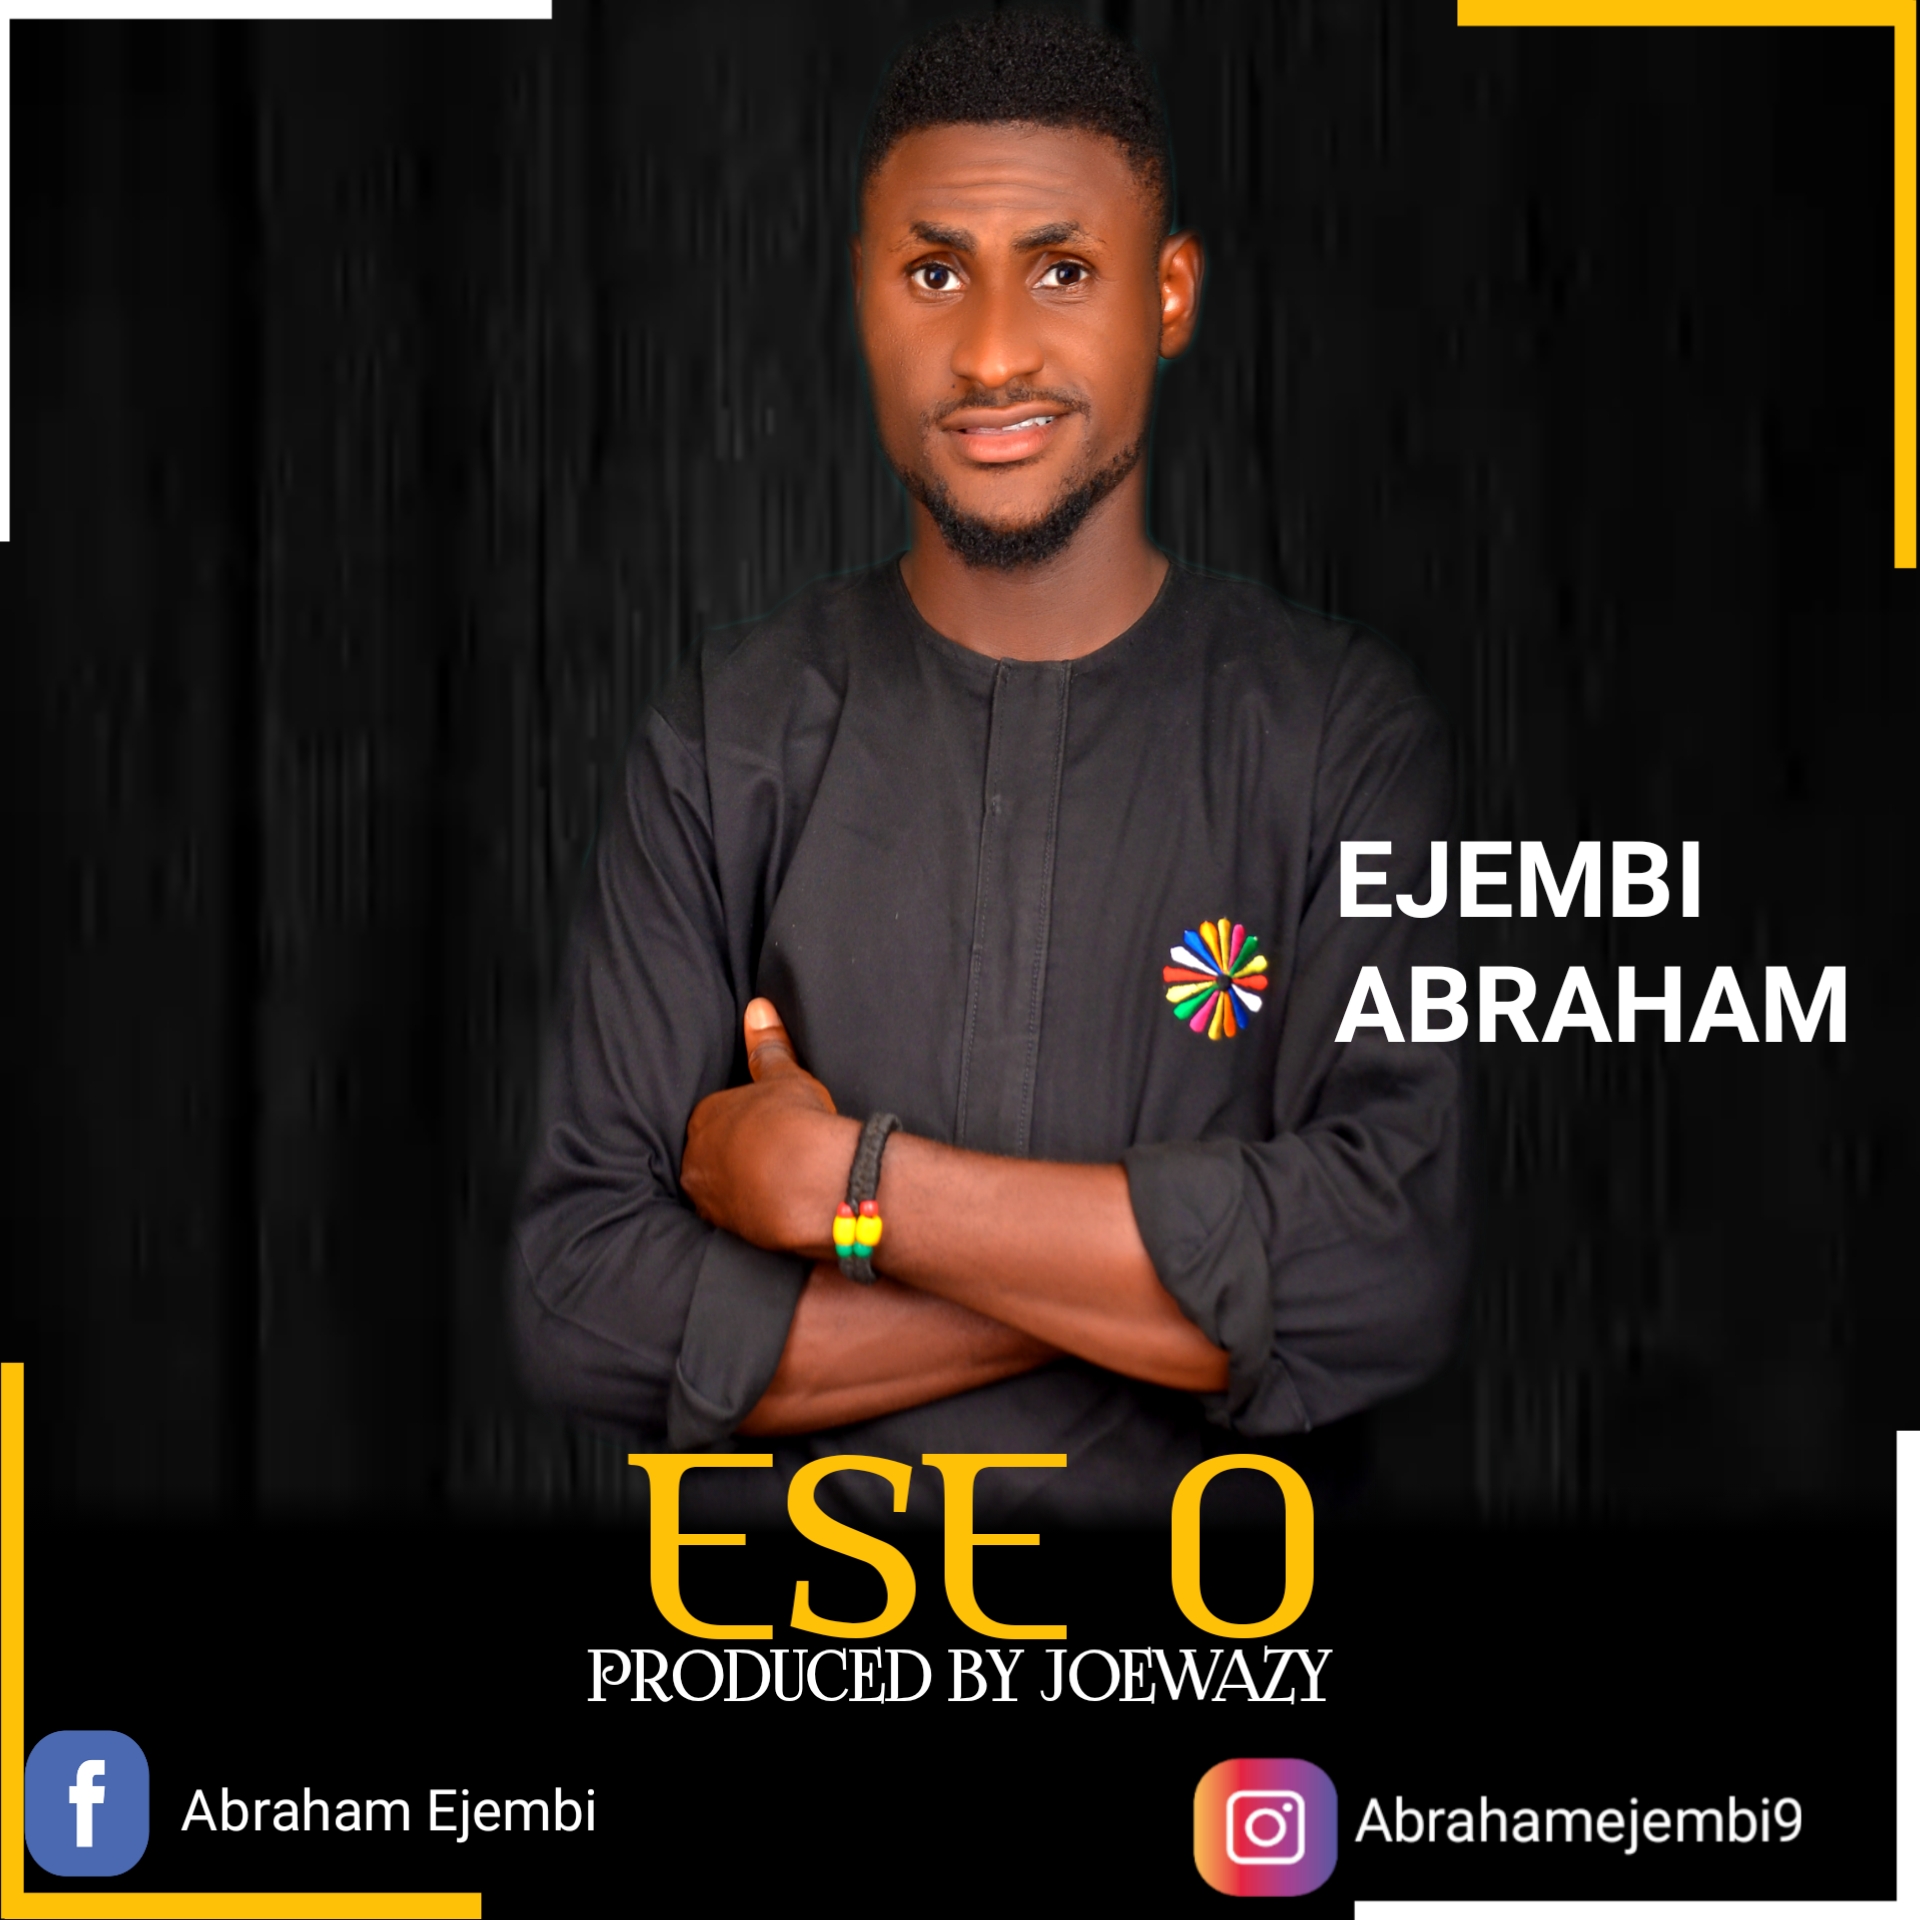 [New Release] Download ESE O by EJEMBI ABRAHAM 20